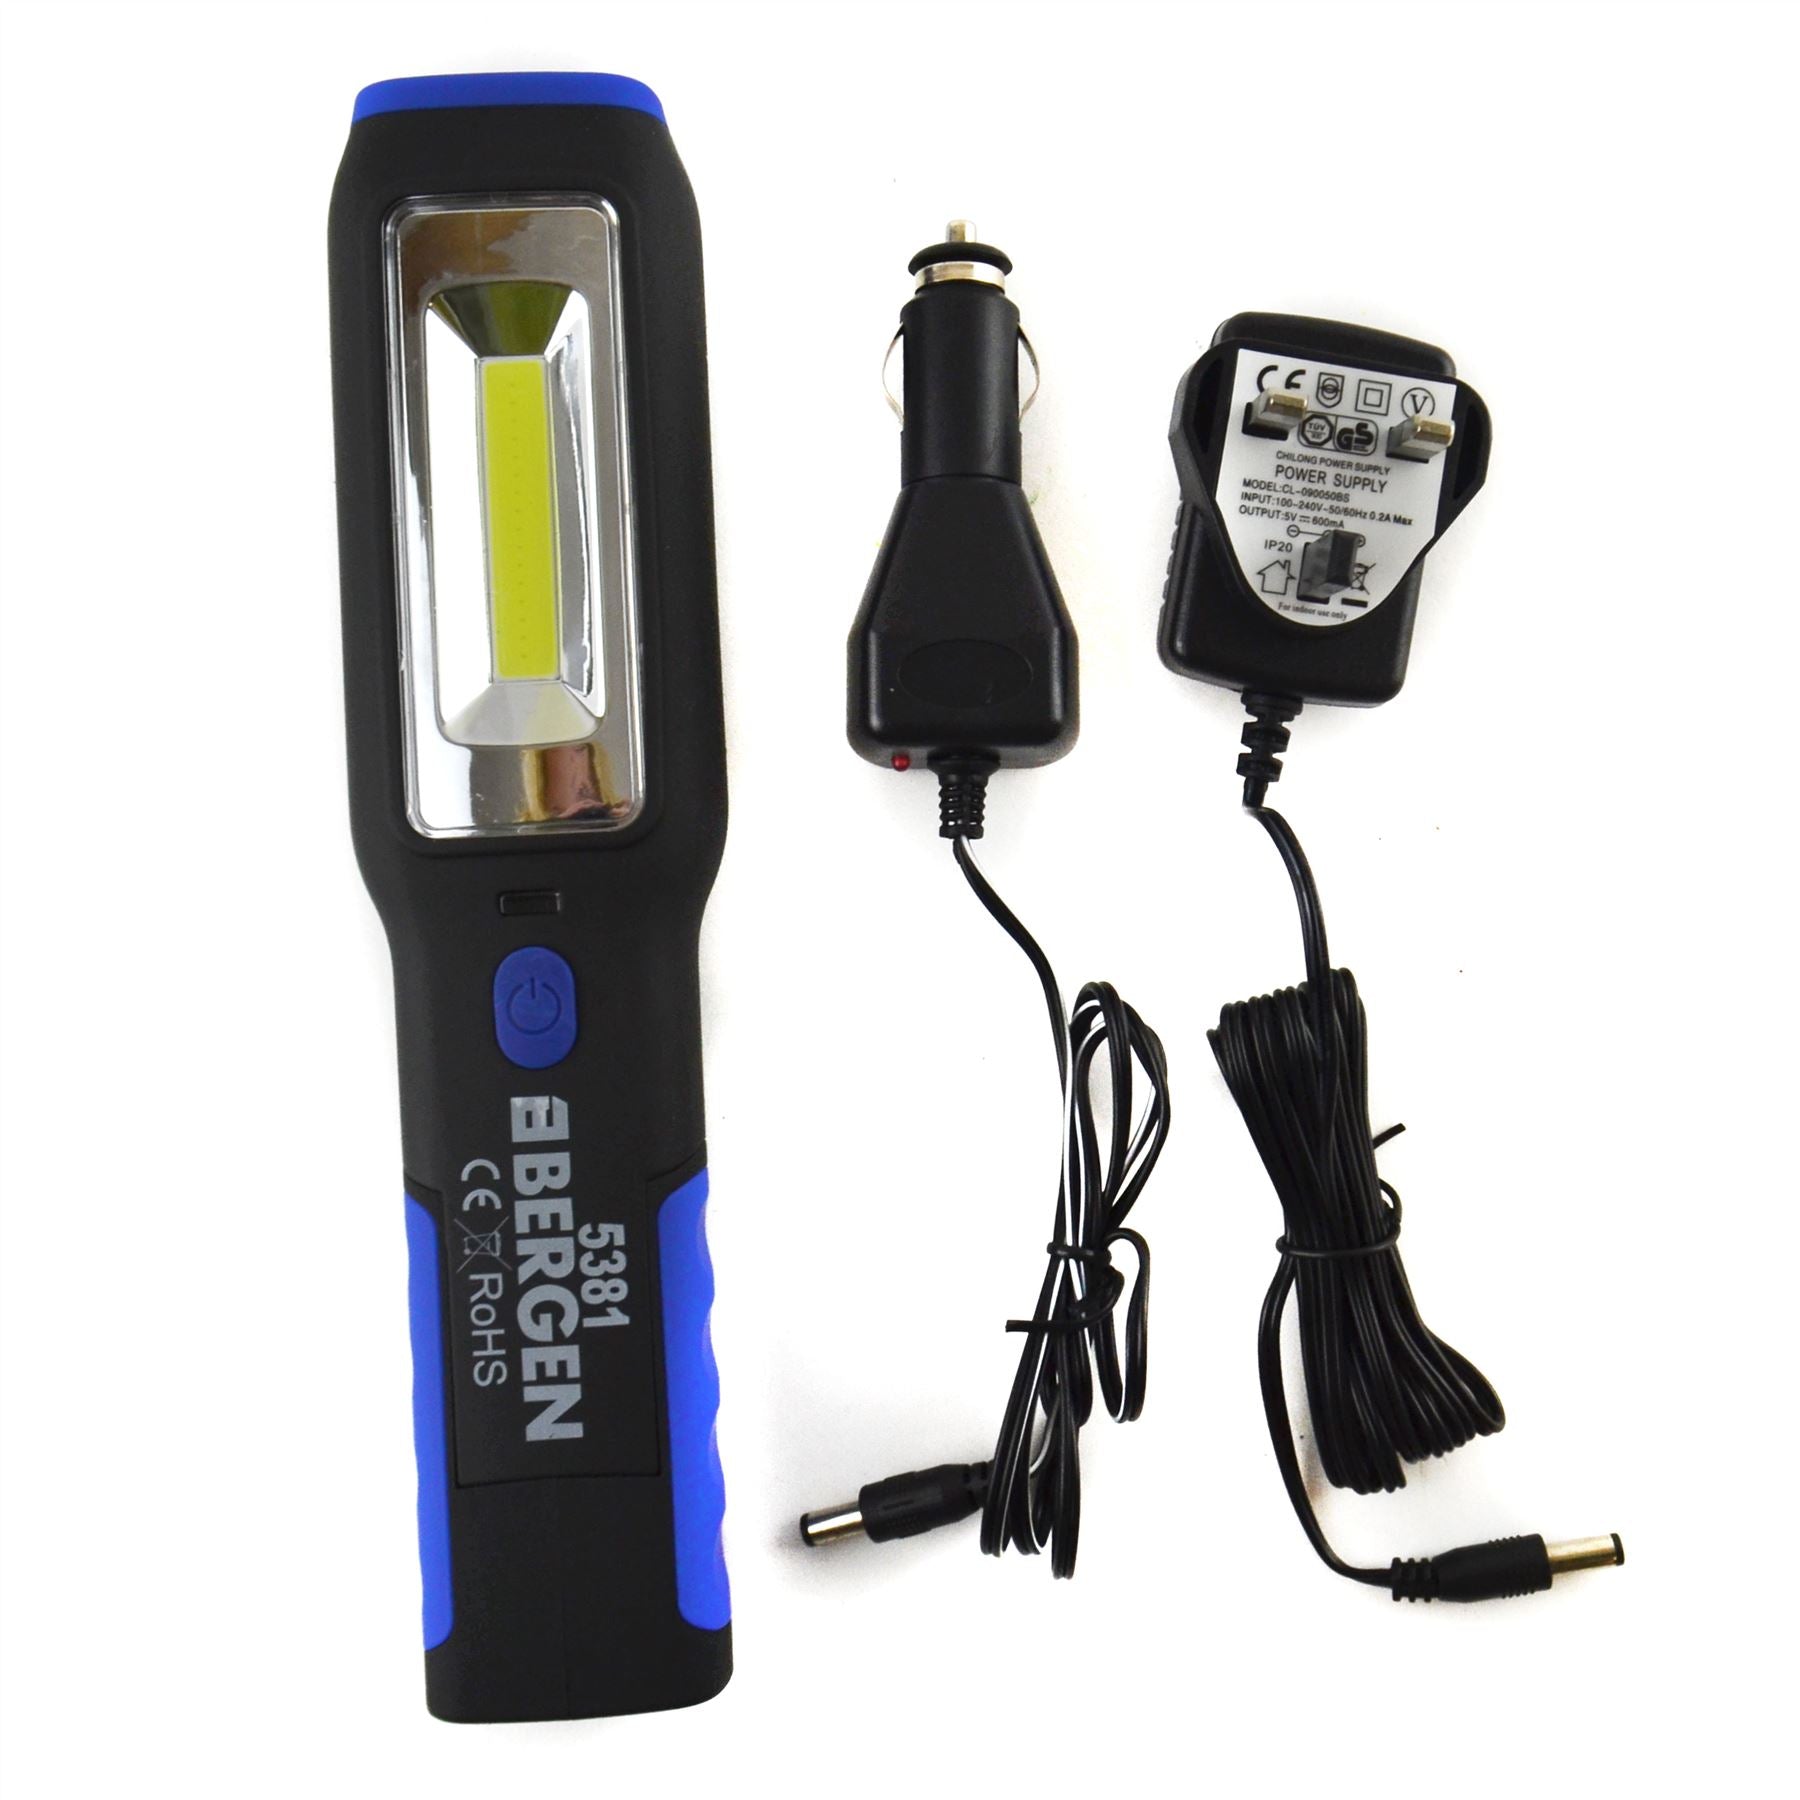 Bright Rechargeable Magbender Light Torch 3 WATT COB LED Inspection Lamp